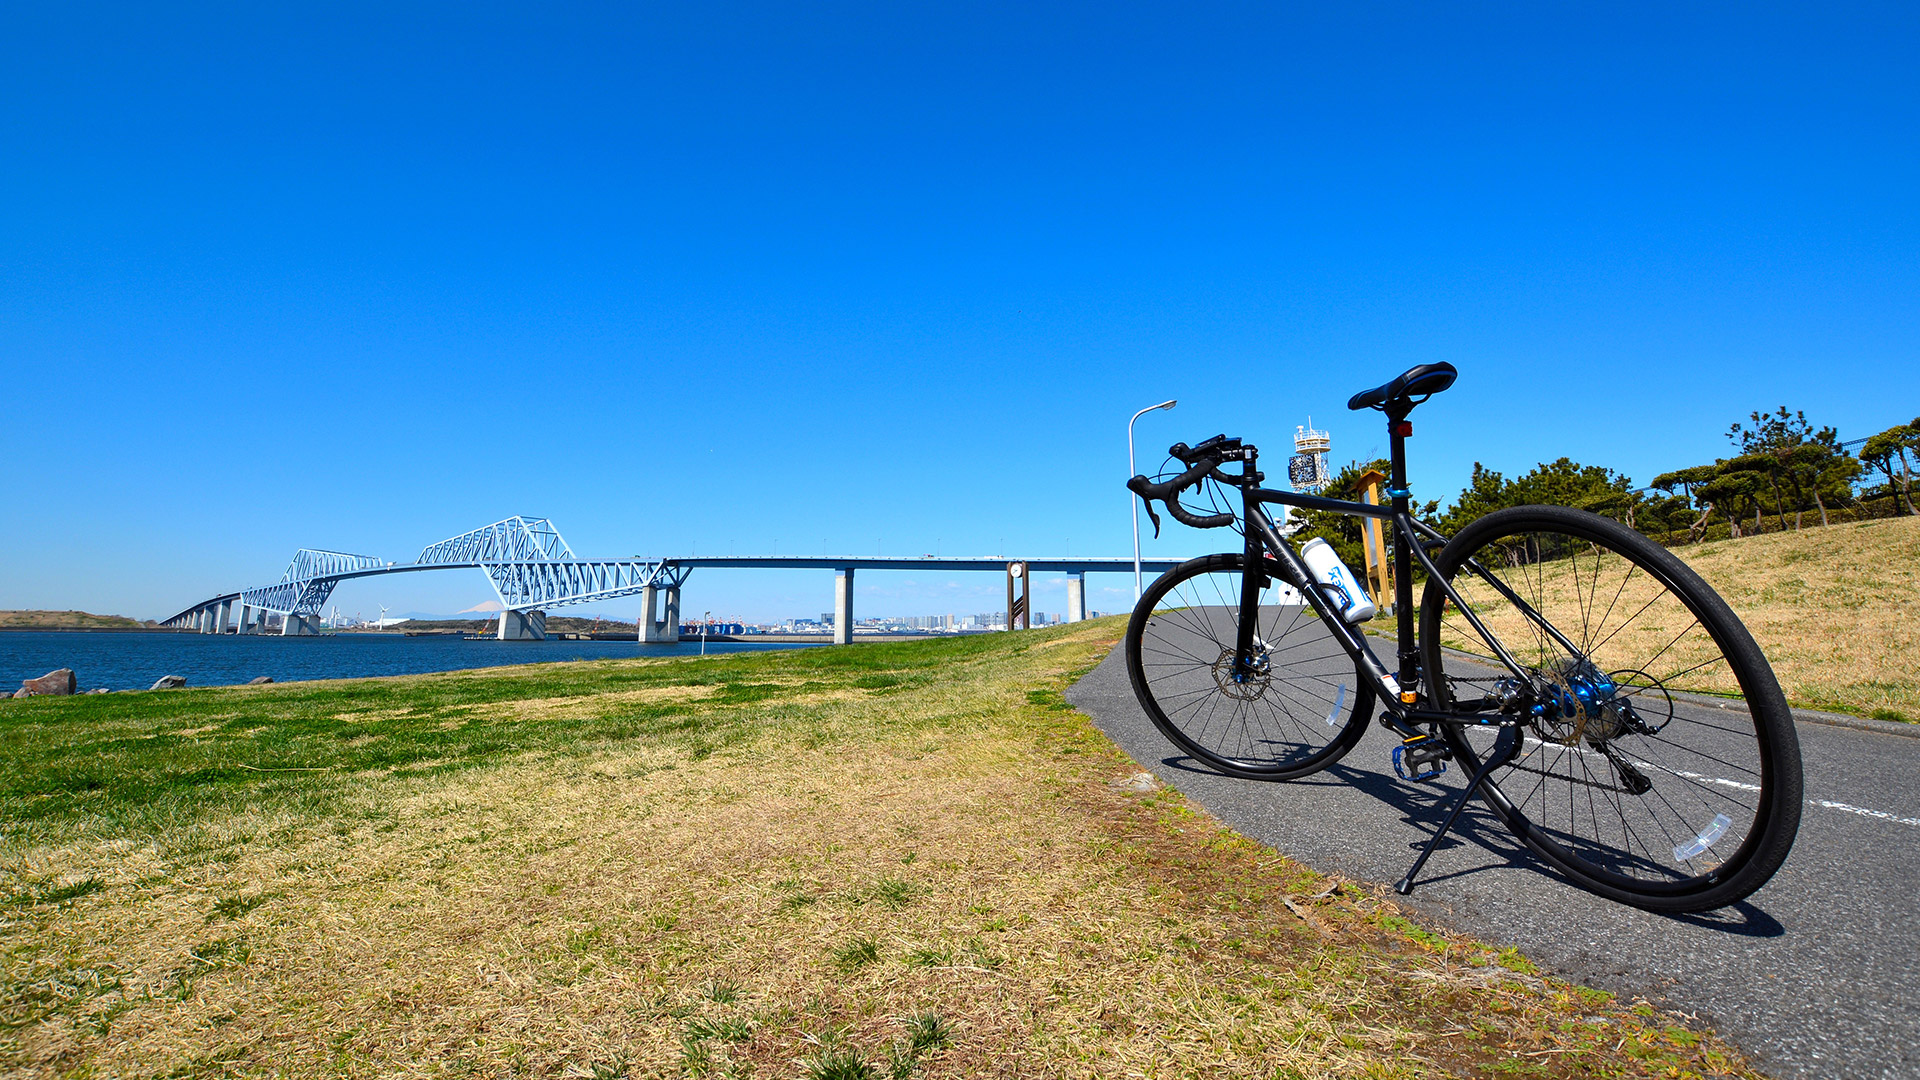 Get on a bicycle and tour Tokyo's waterfronts | GO TOKYO